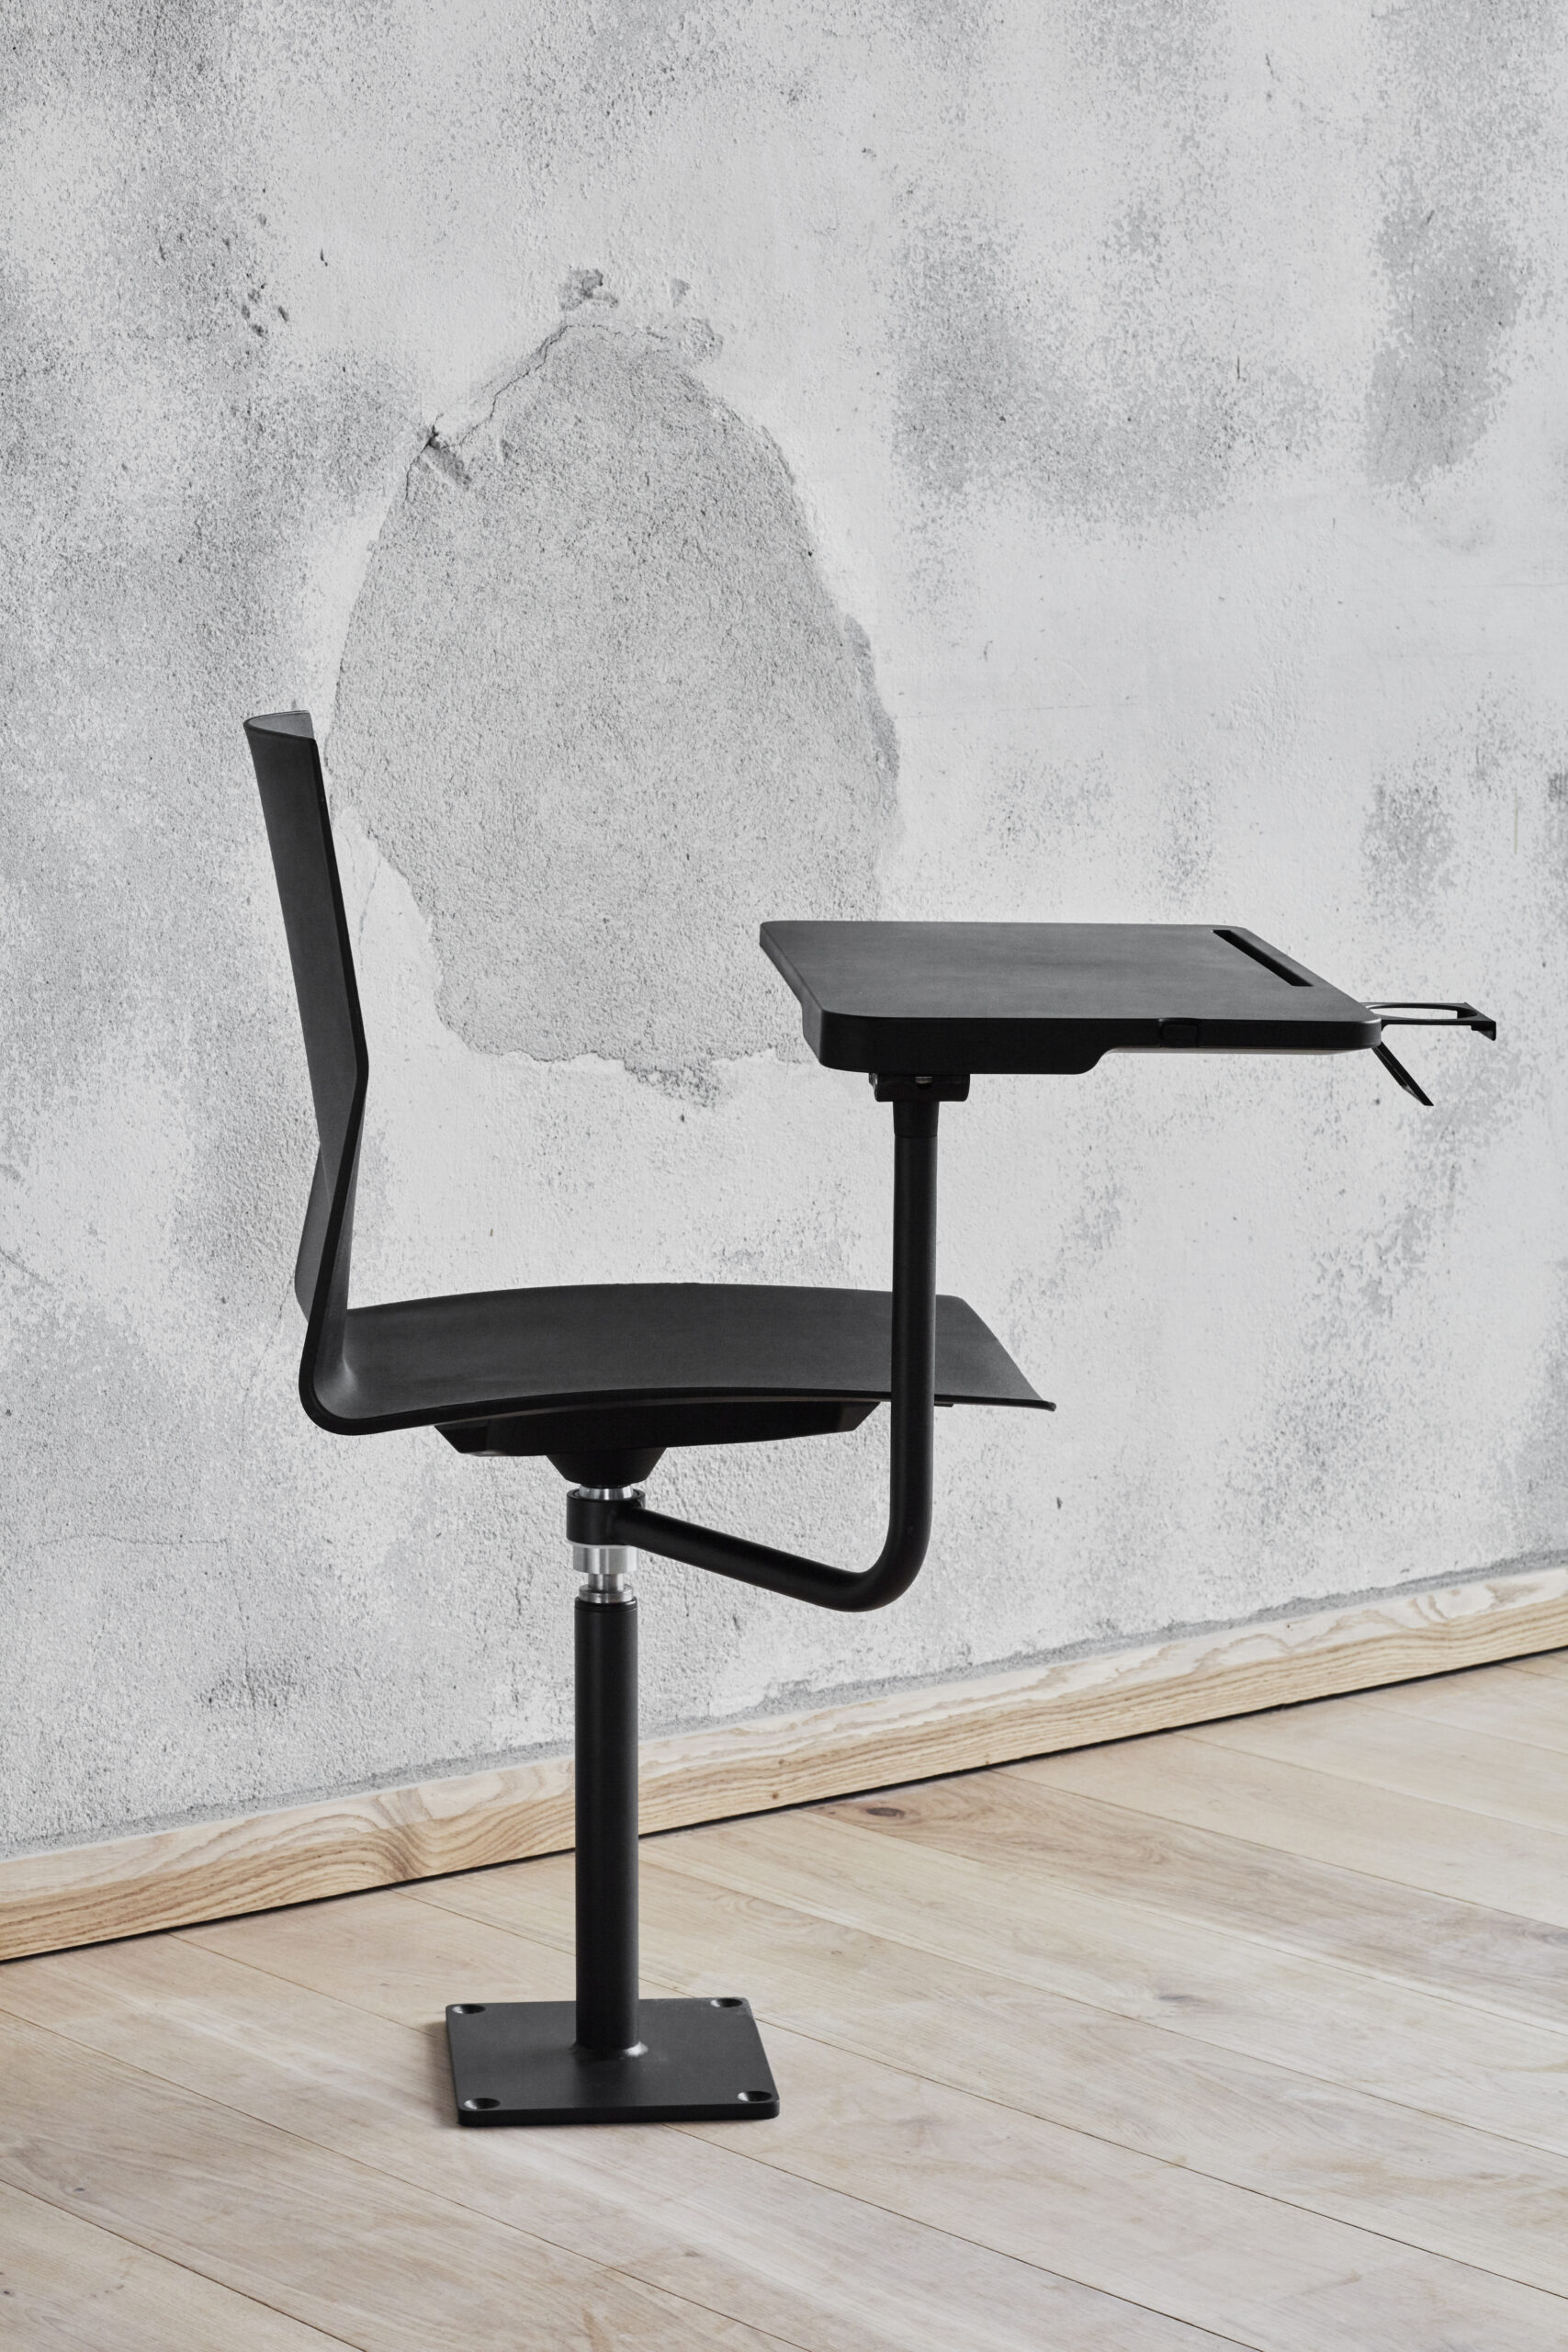 OCEE&FOUR – Chairs – FourCast 2 Audi – Details Image 3